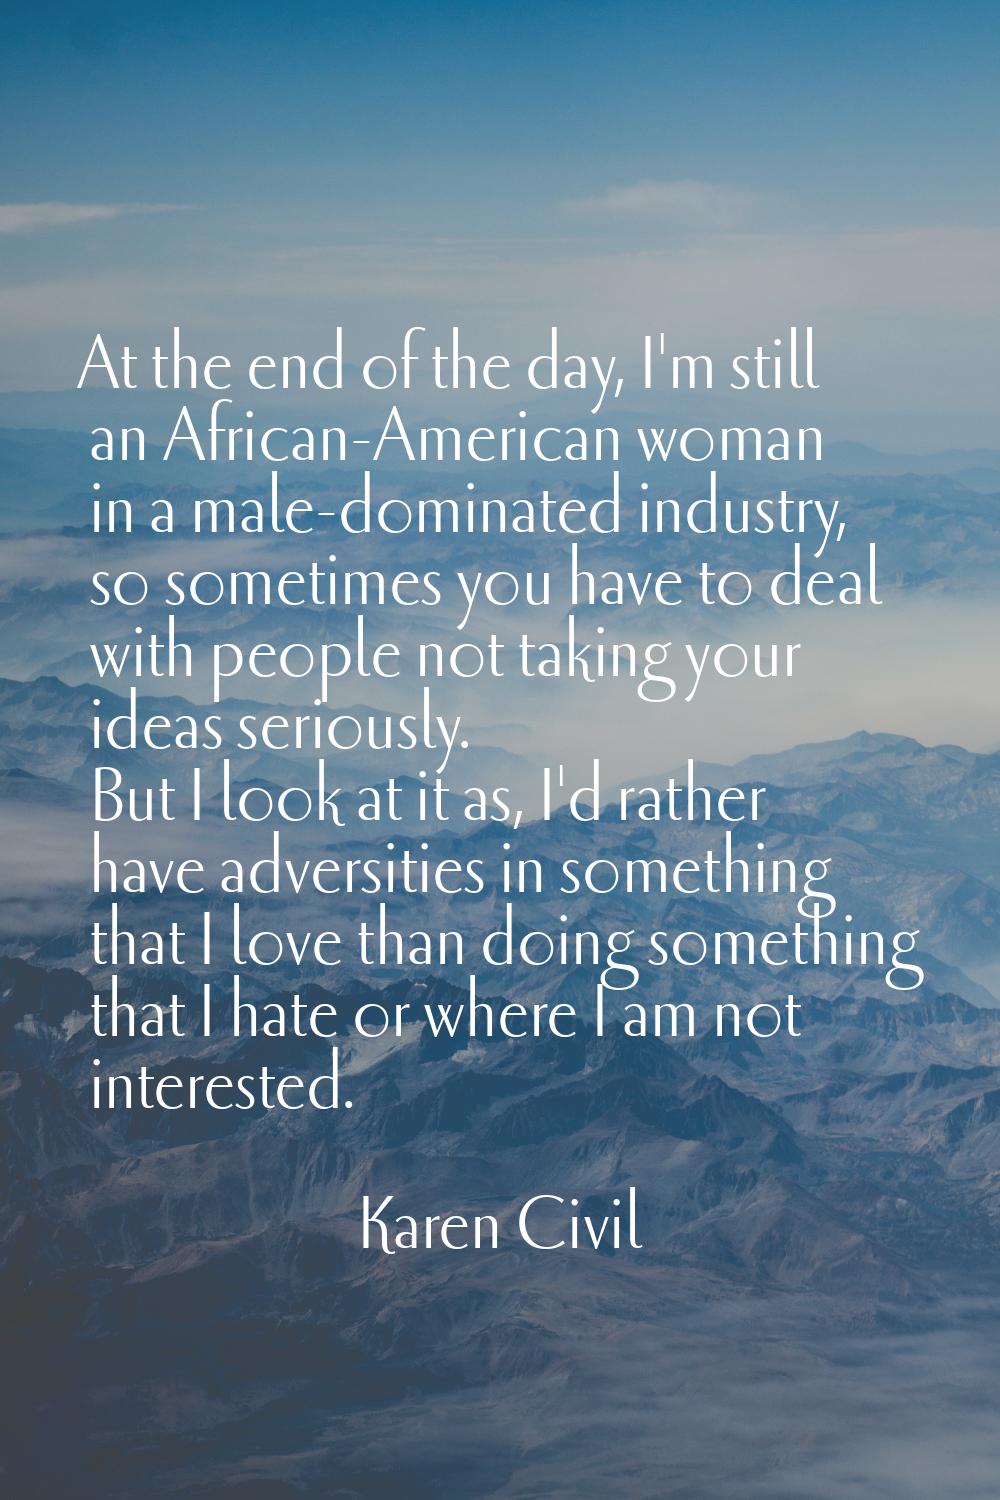 At the end of the day, I'm still an African-American woman in a male-dominated industry, so sometim